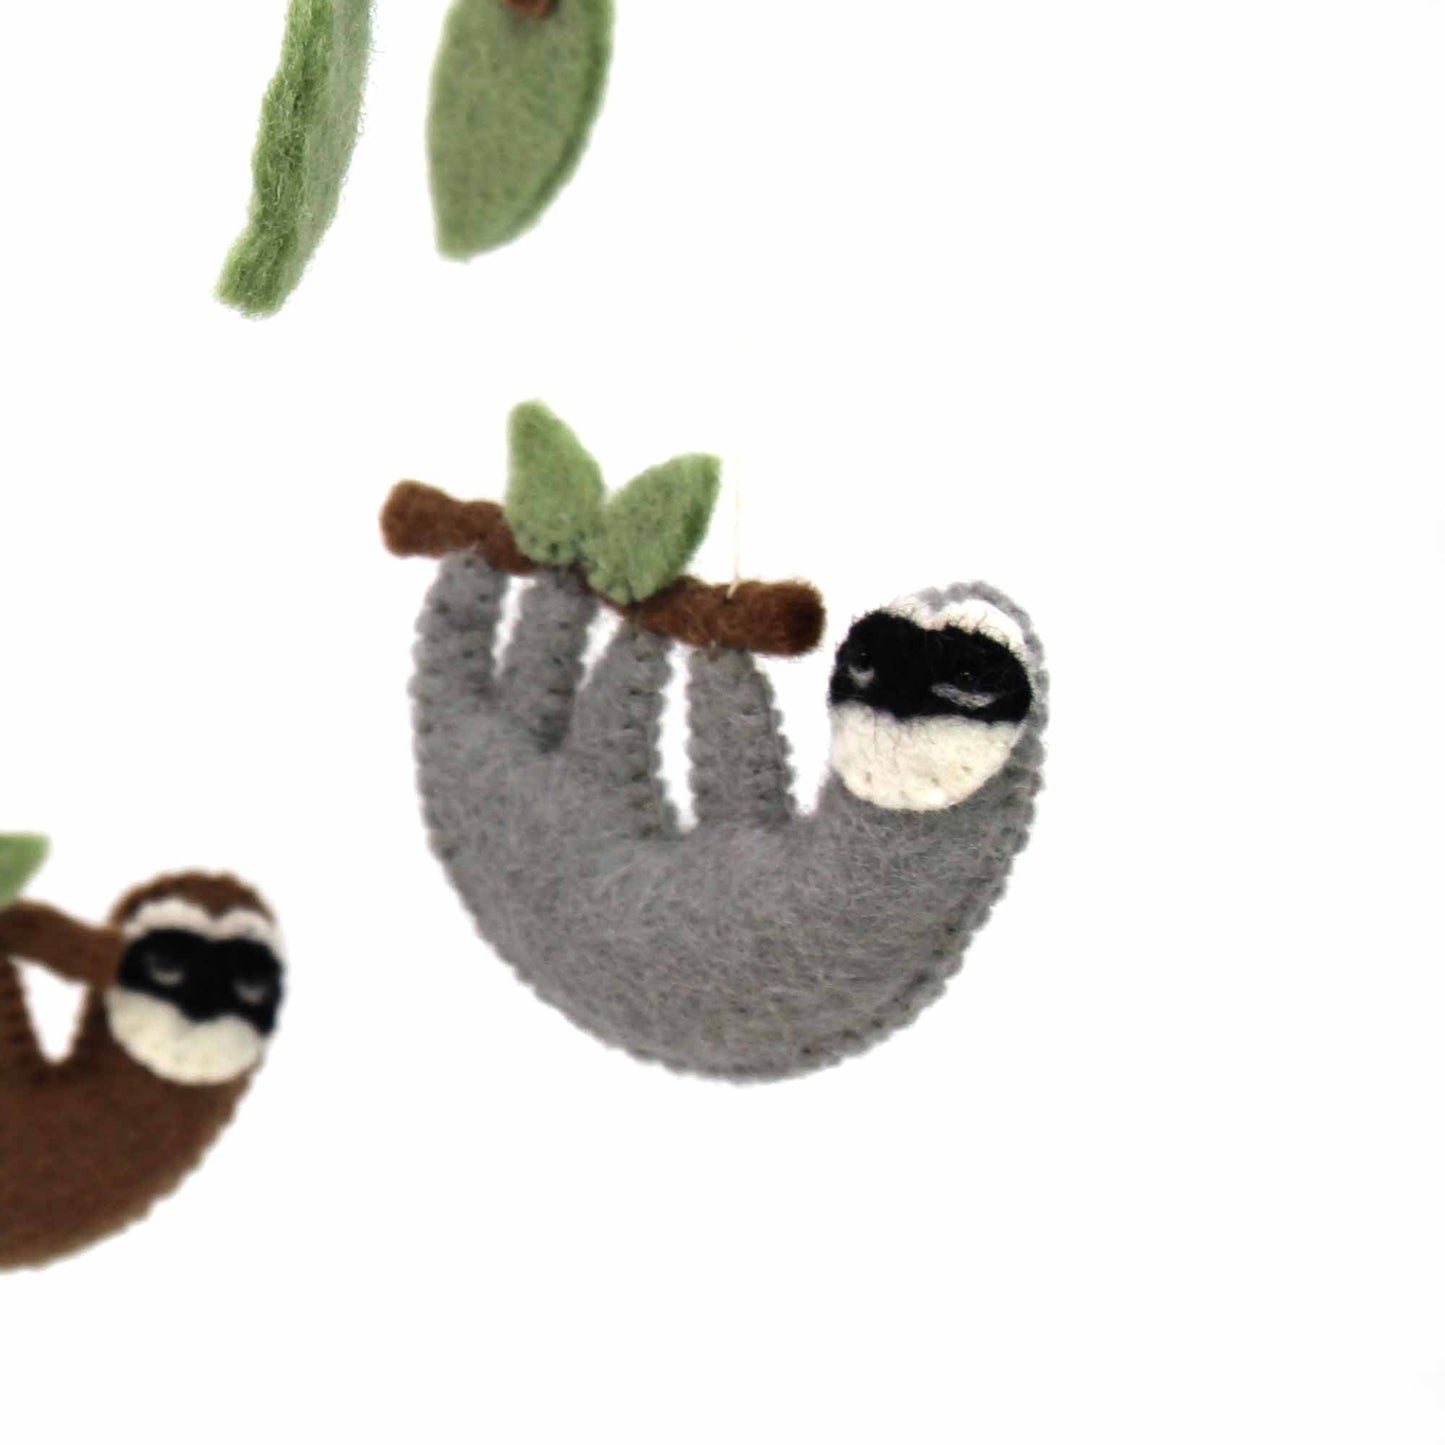 hand-crafted-felt-sloth-mobile